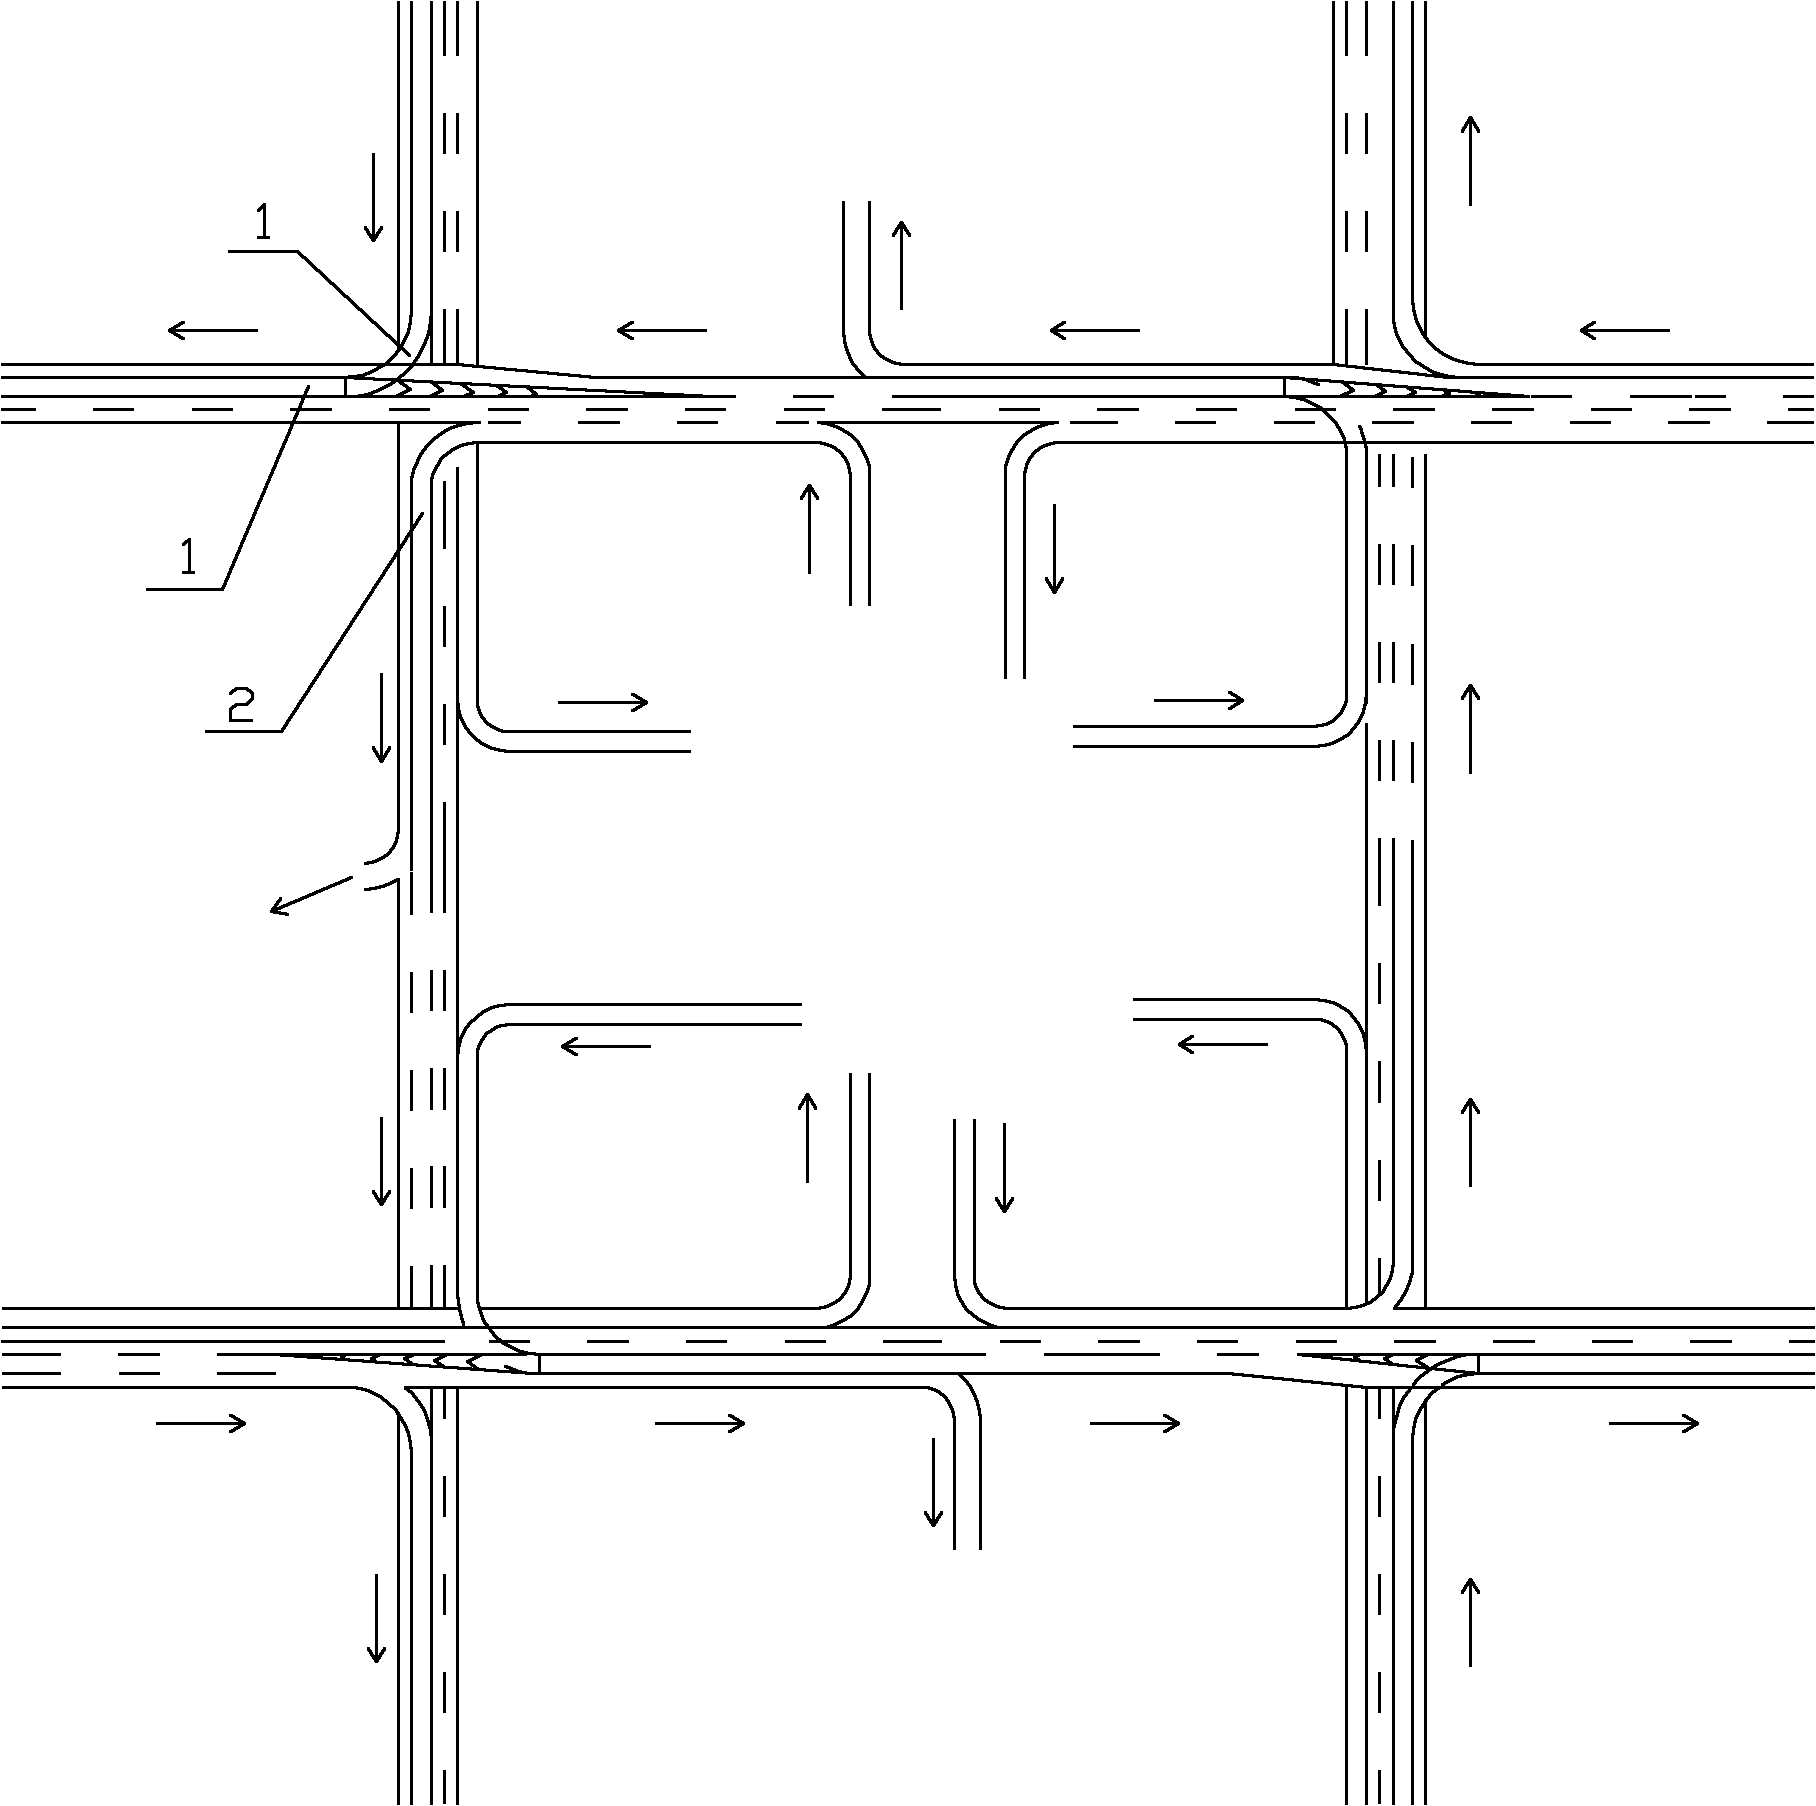 Road network system